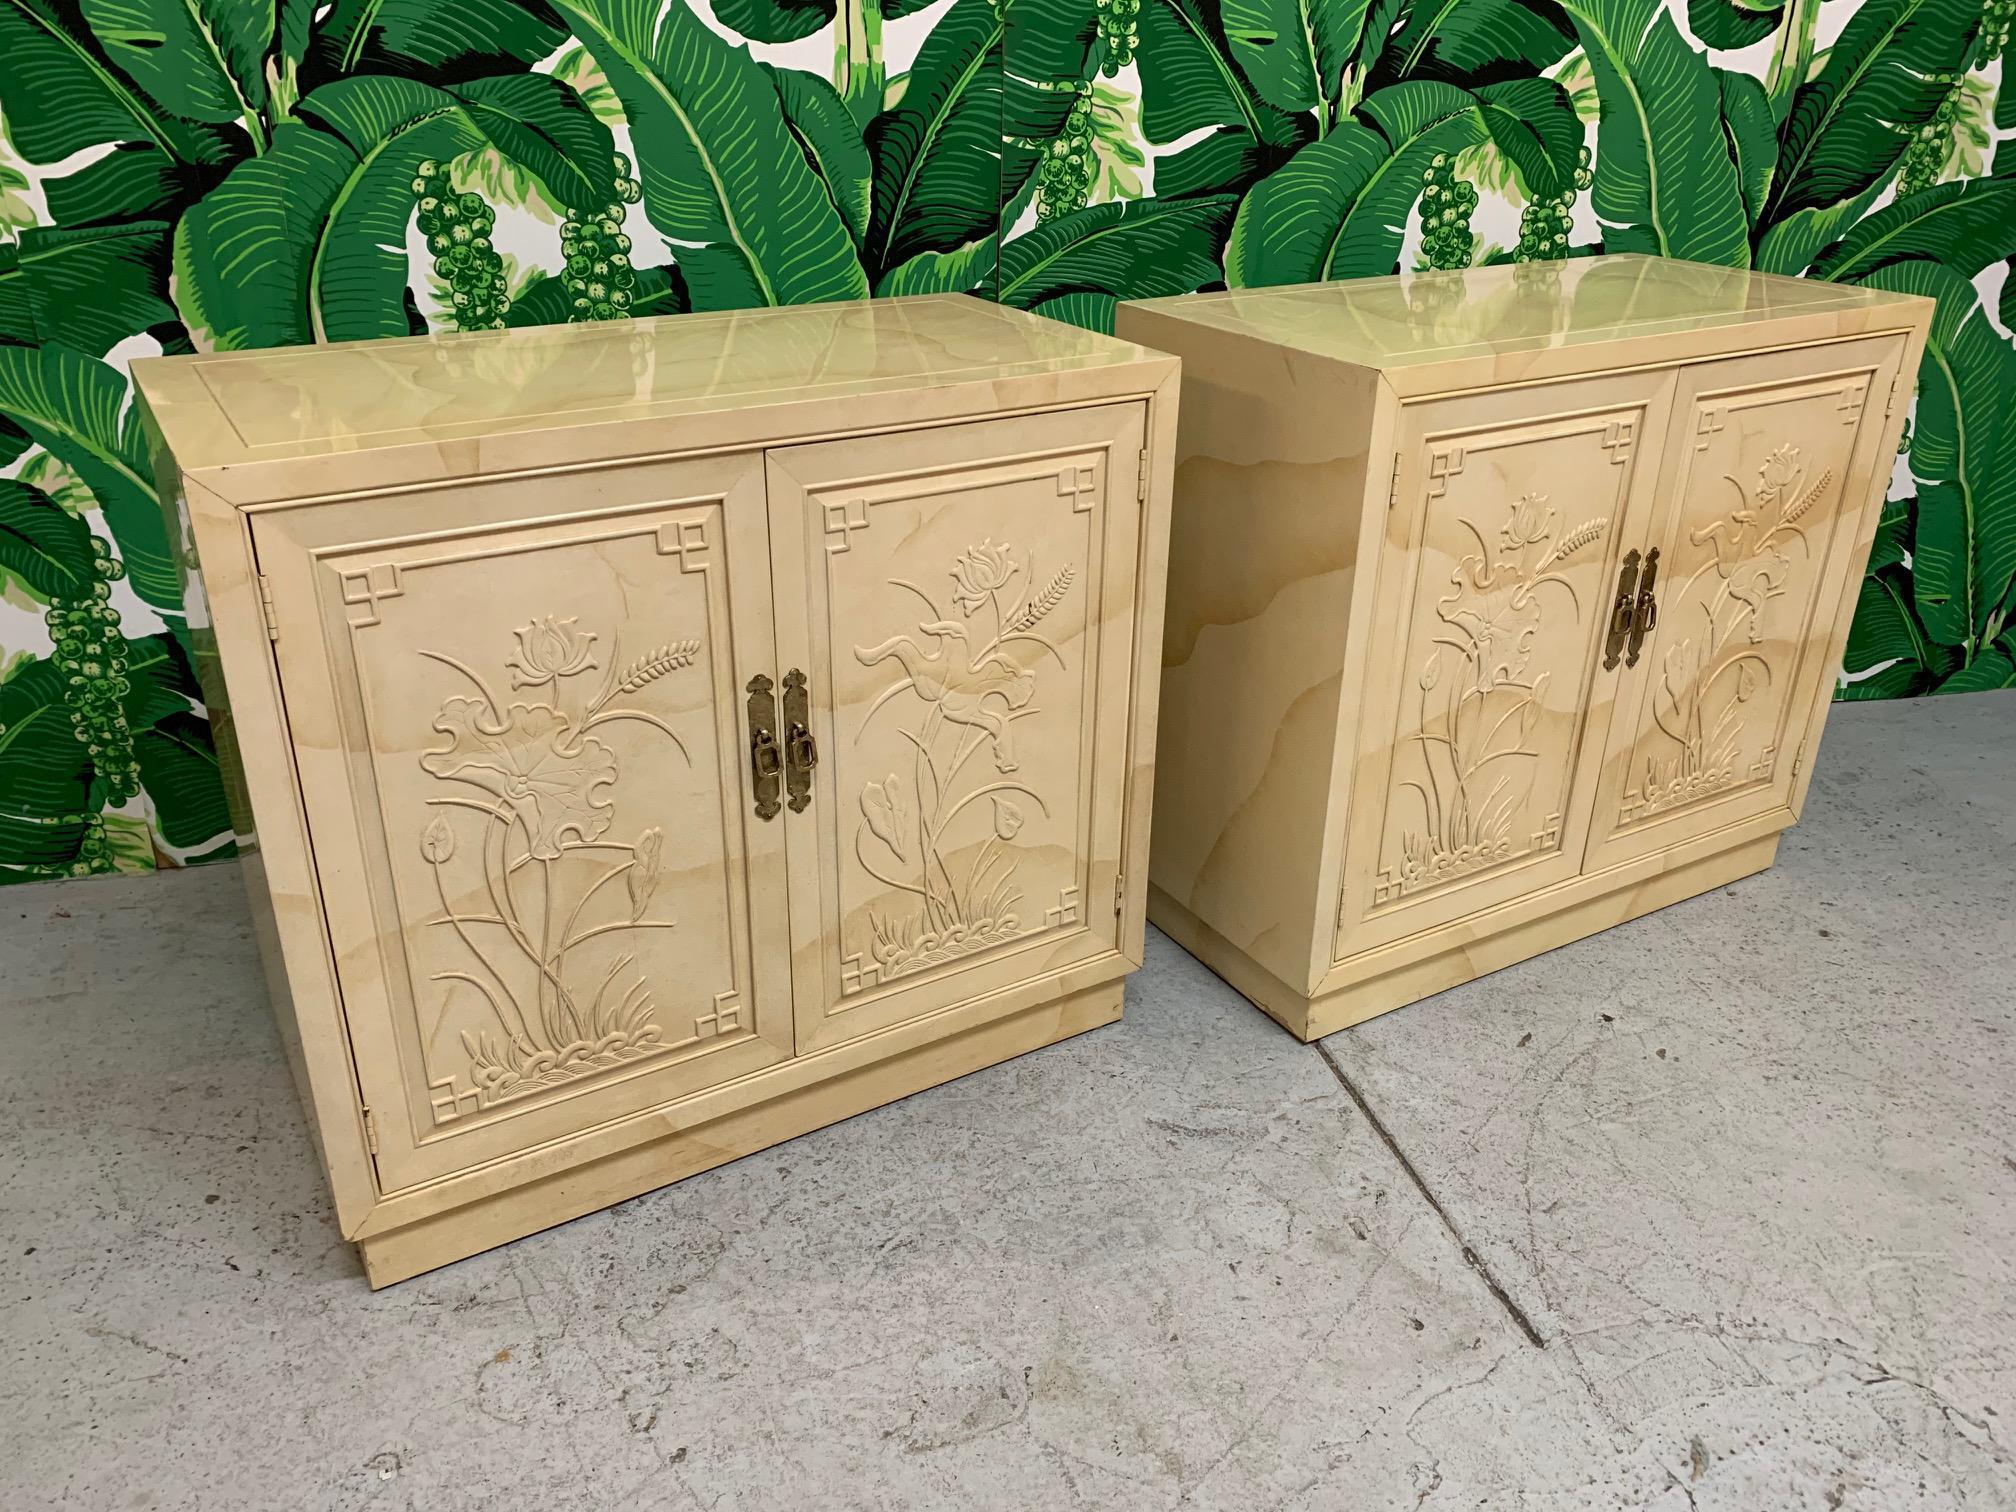 Pair of chinoiserie style cabinets by Henredon from the Folio 16 collection. Can be used as bunching chests or separately. Top drawer has Henredon felt flatware organizer still in original plastic. Good condition with imperfections consistent with